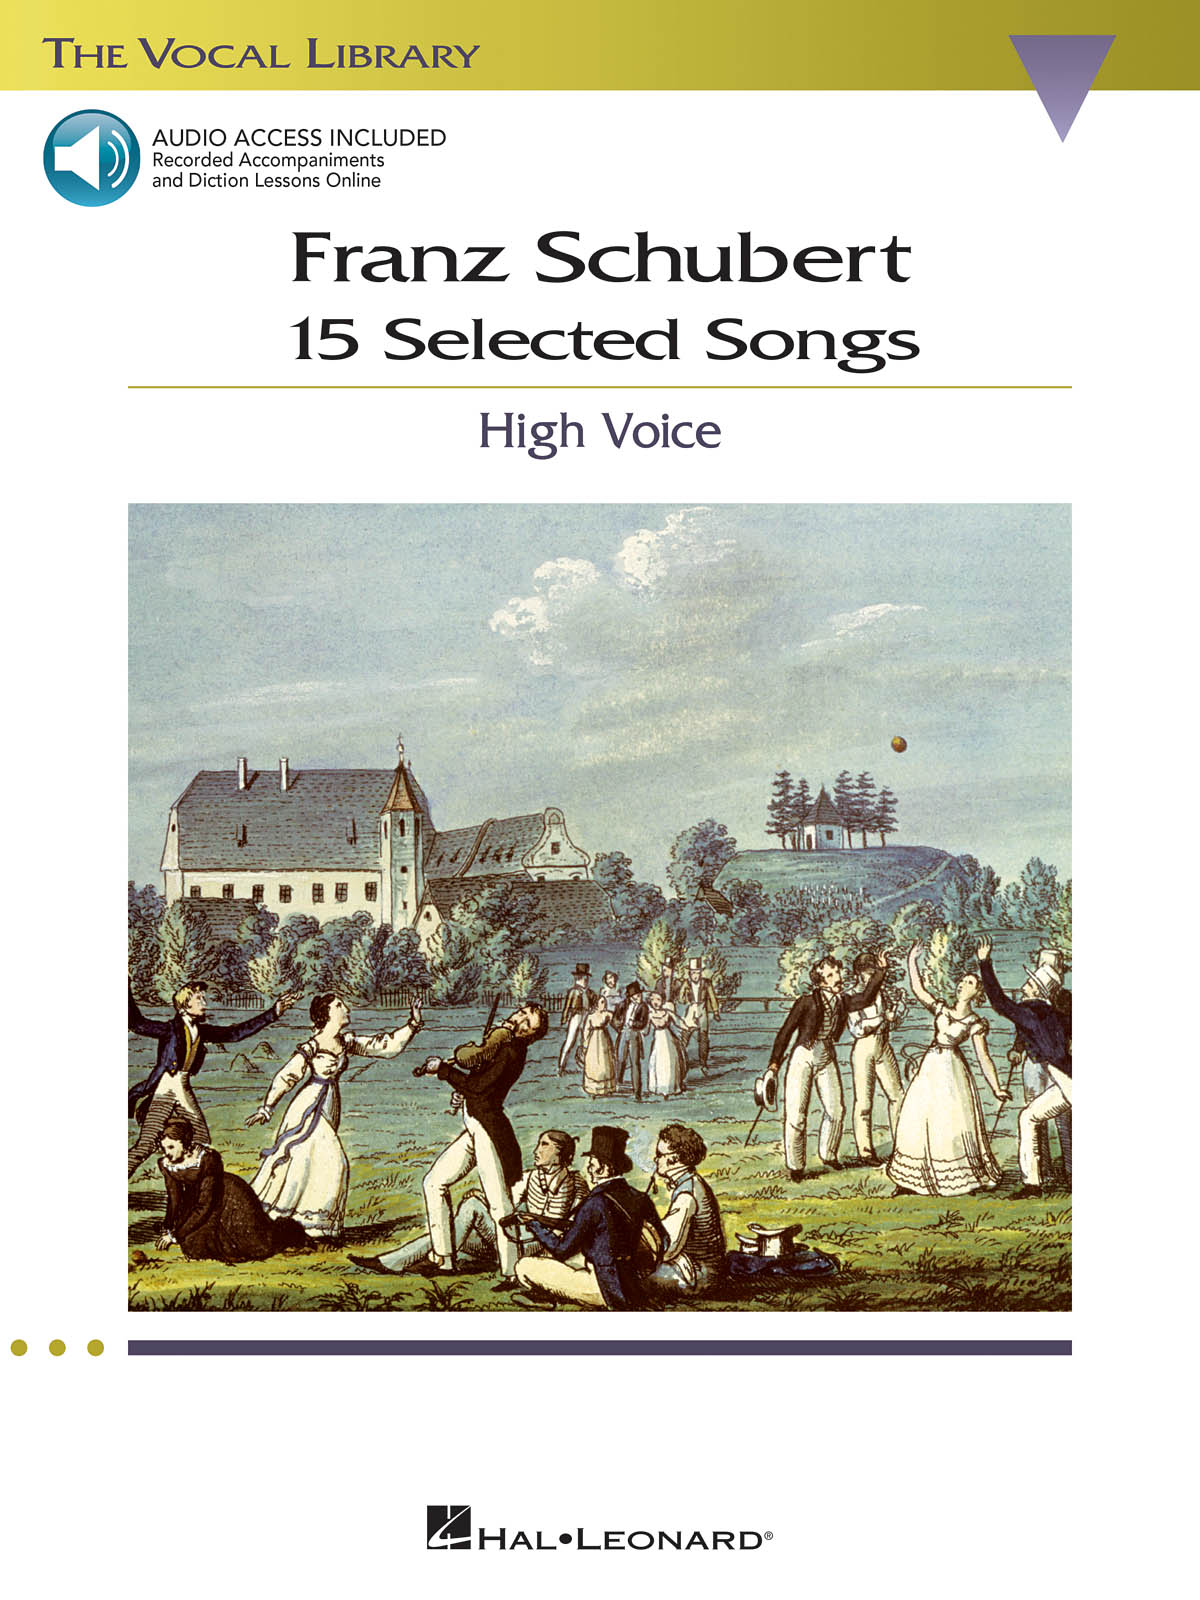 Franz Schubert: 15 Selected Songs - High Voice: Vocal and Piano: Vocal Album